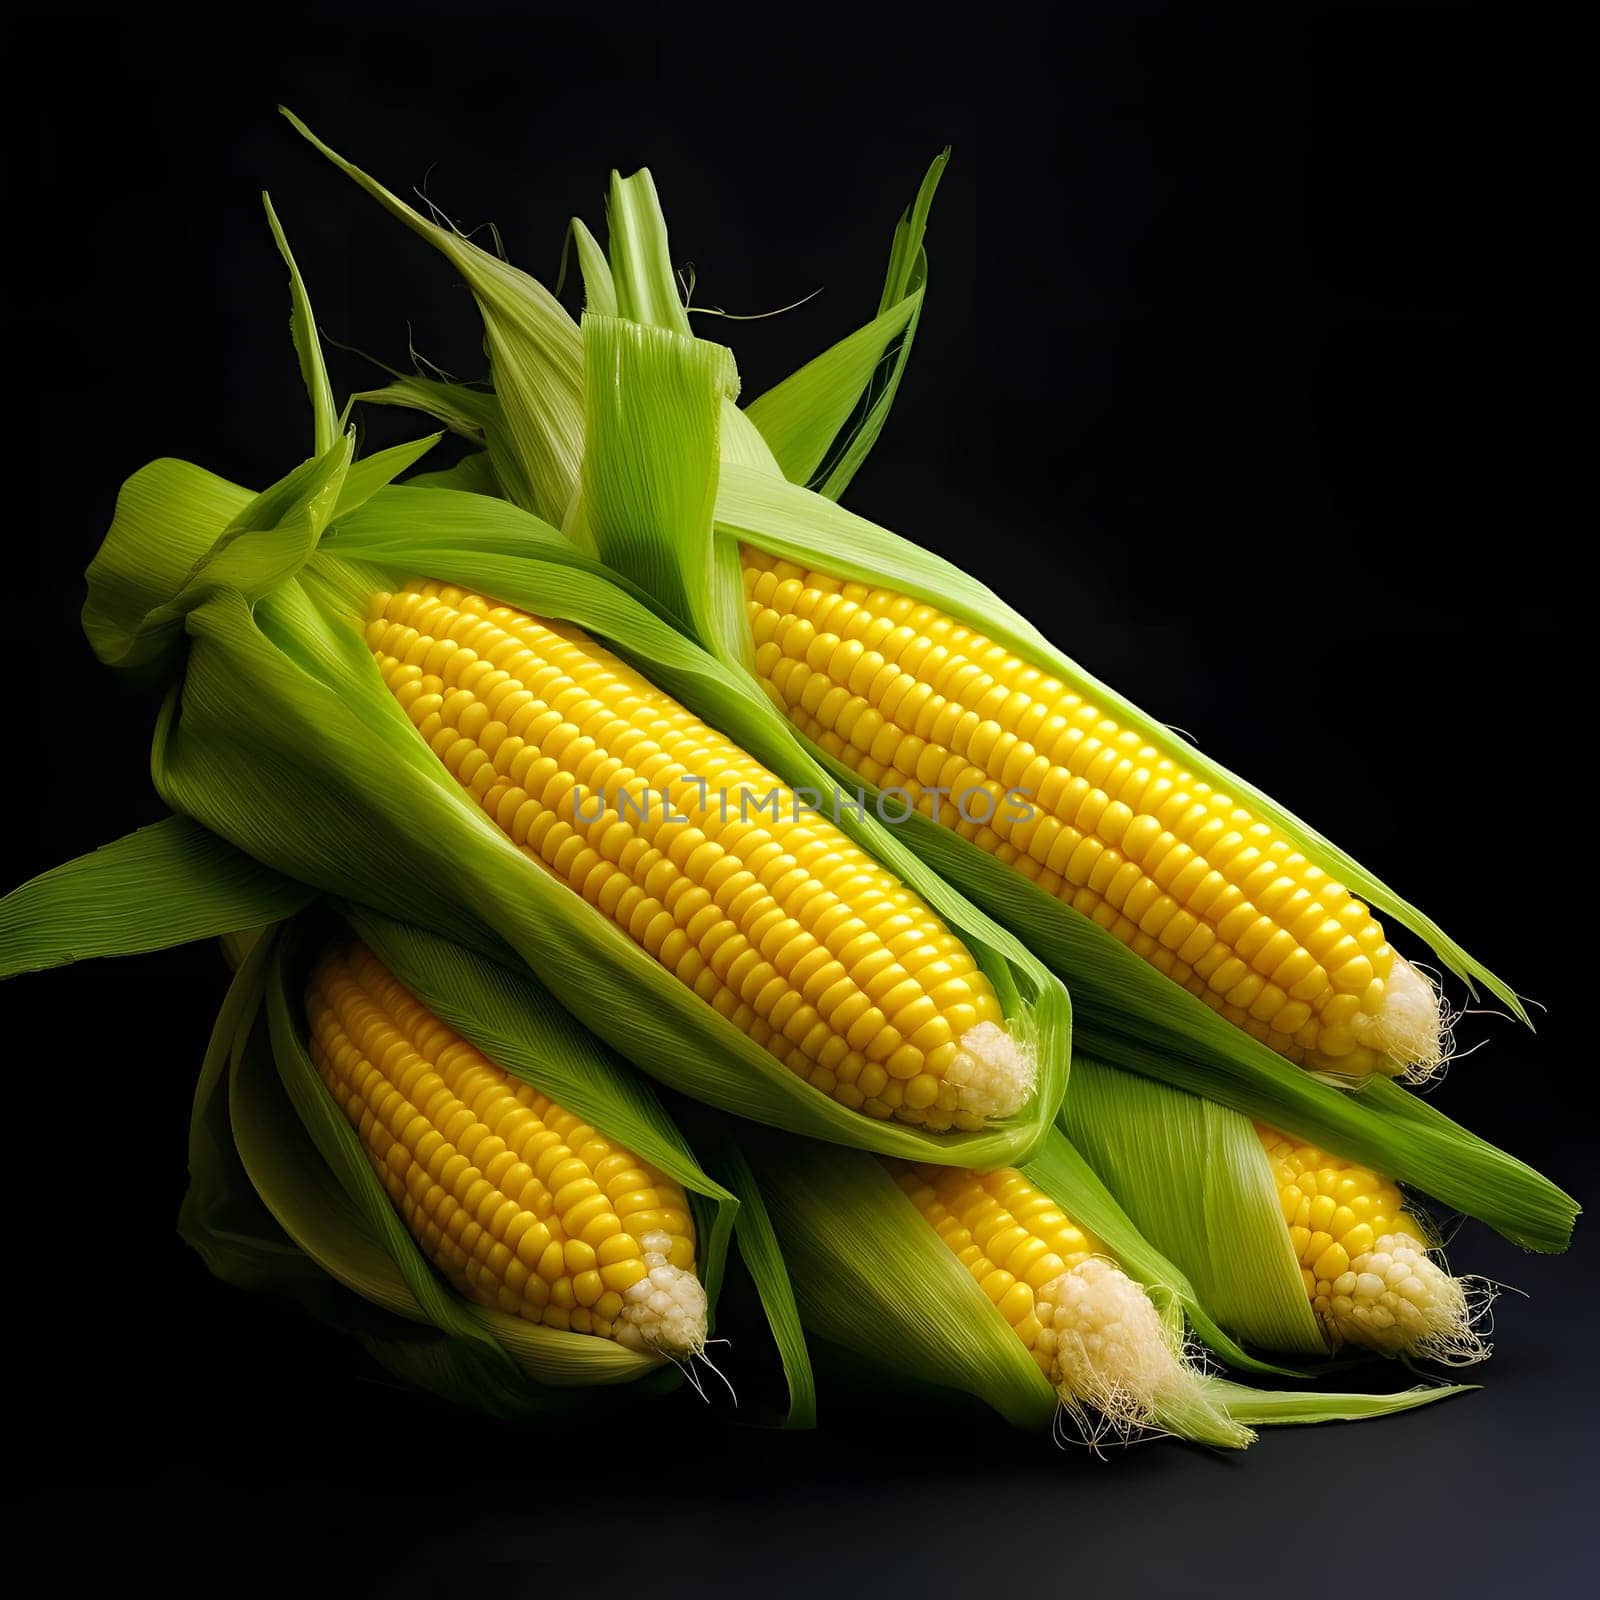 Five yellow corn cobs in leaf on black background isolated. Corn as a dish of thanksgiving for the harvest. by ThemesS